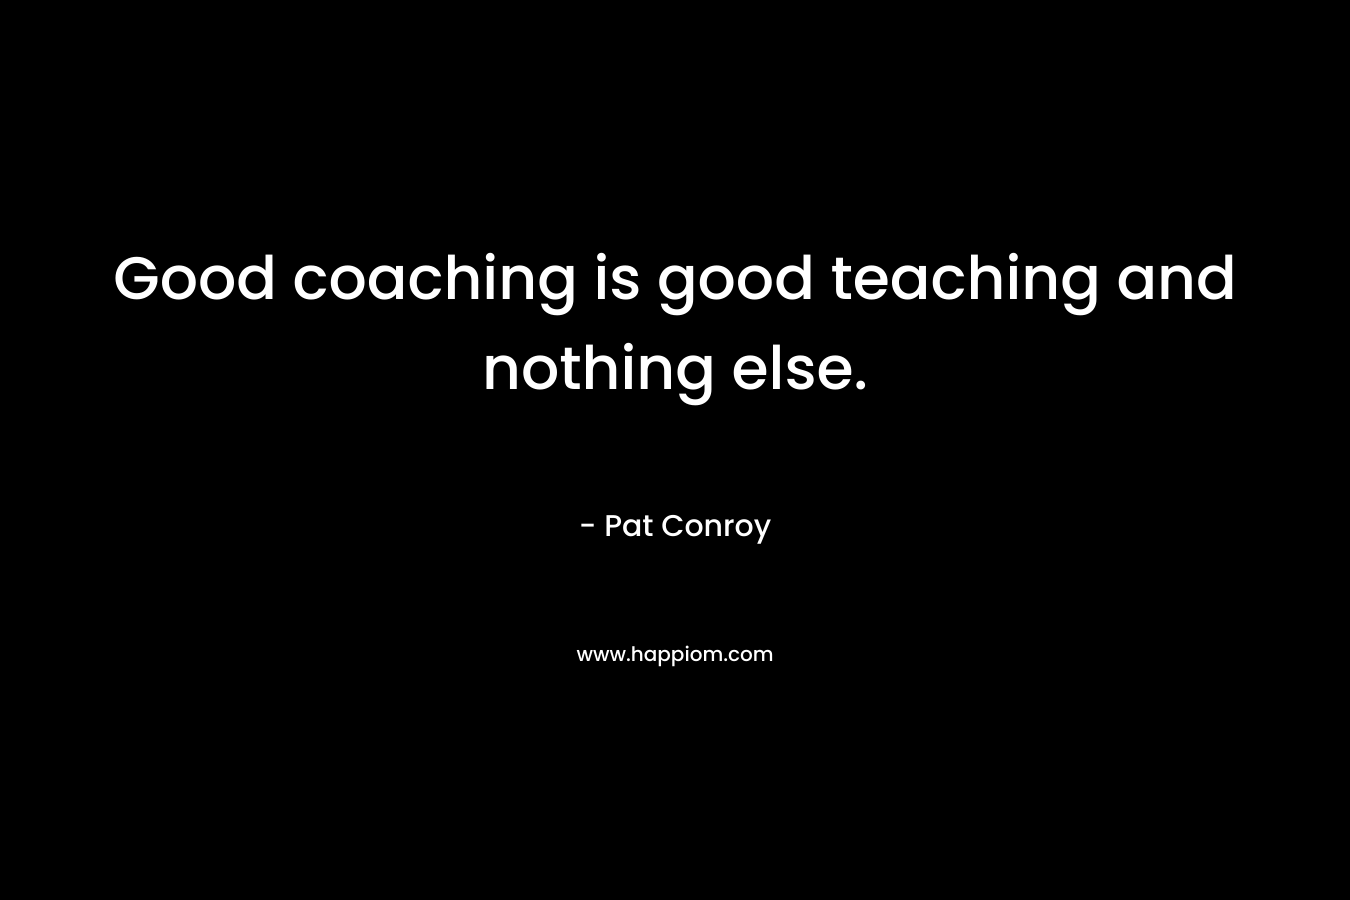 Good coaching is good teaching and nothing else. – Pat Conroy